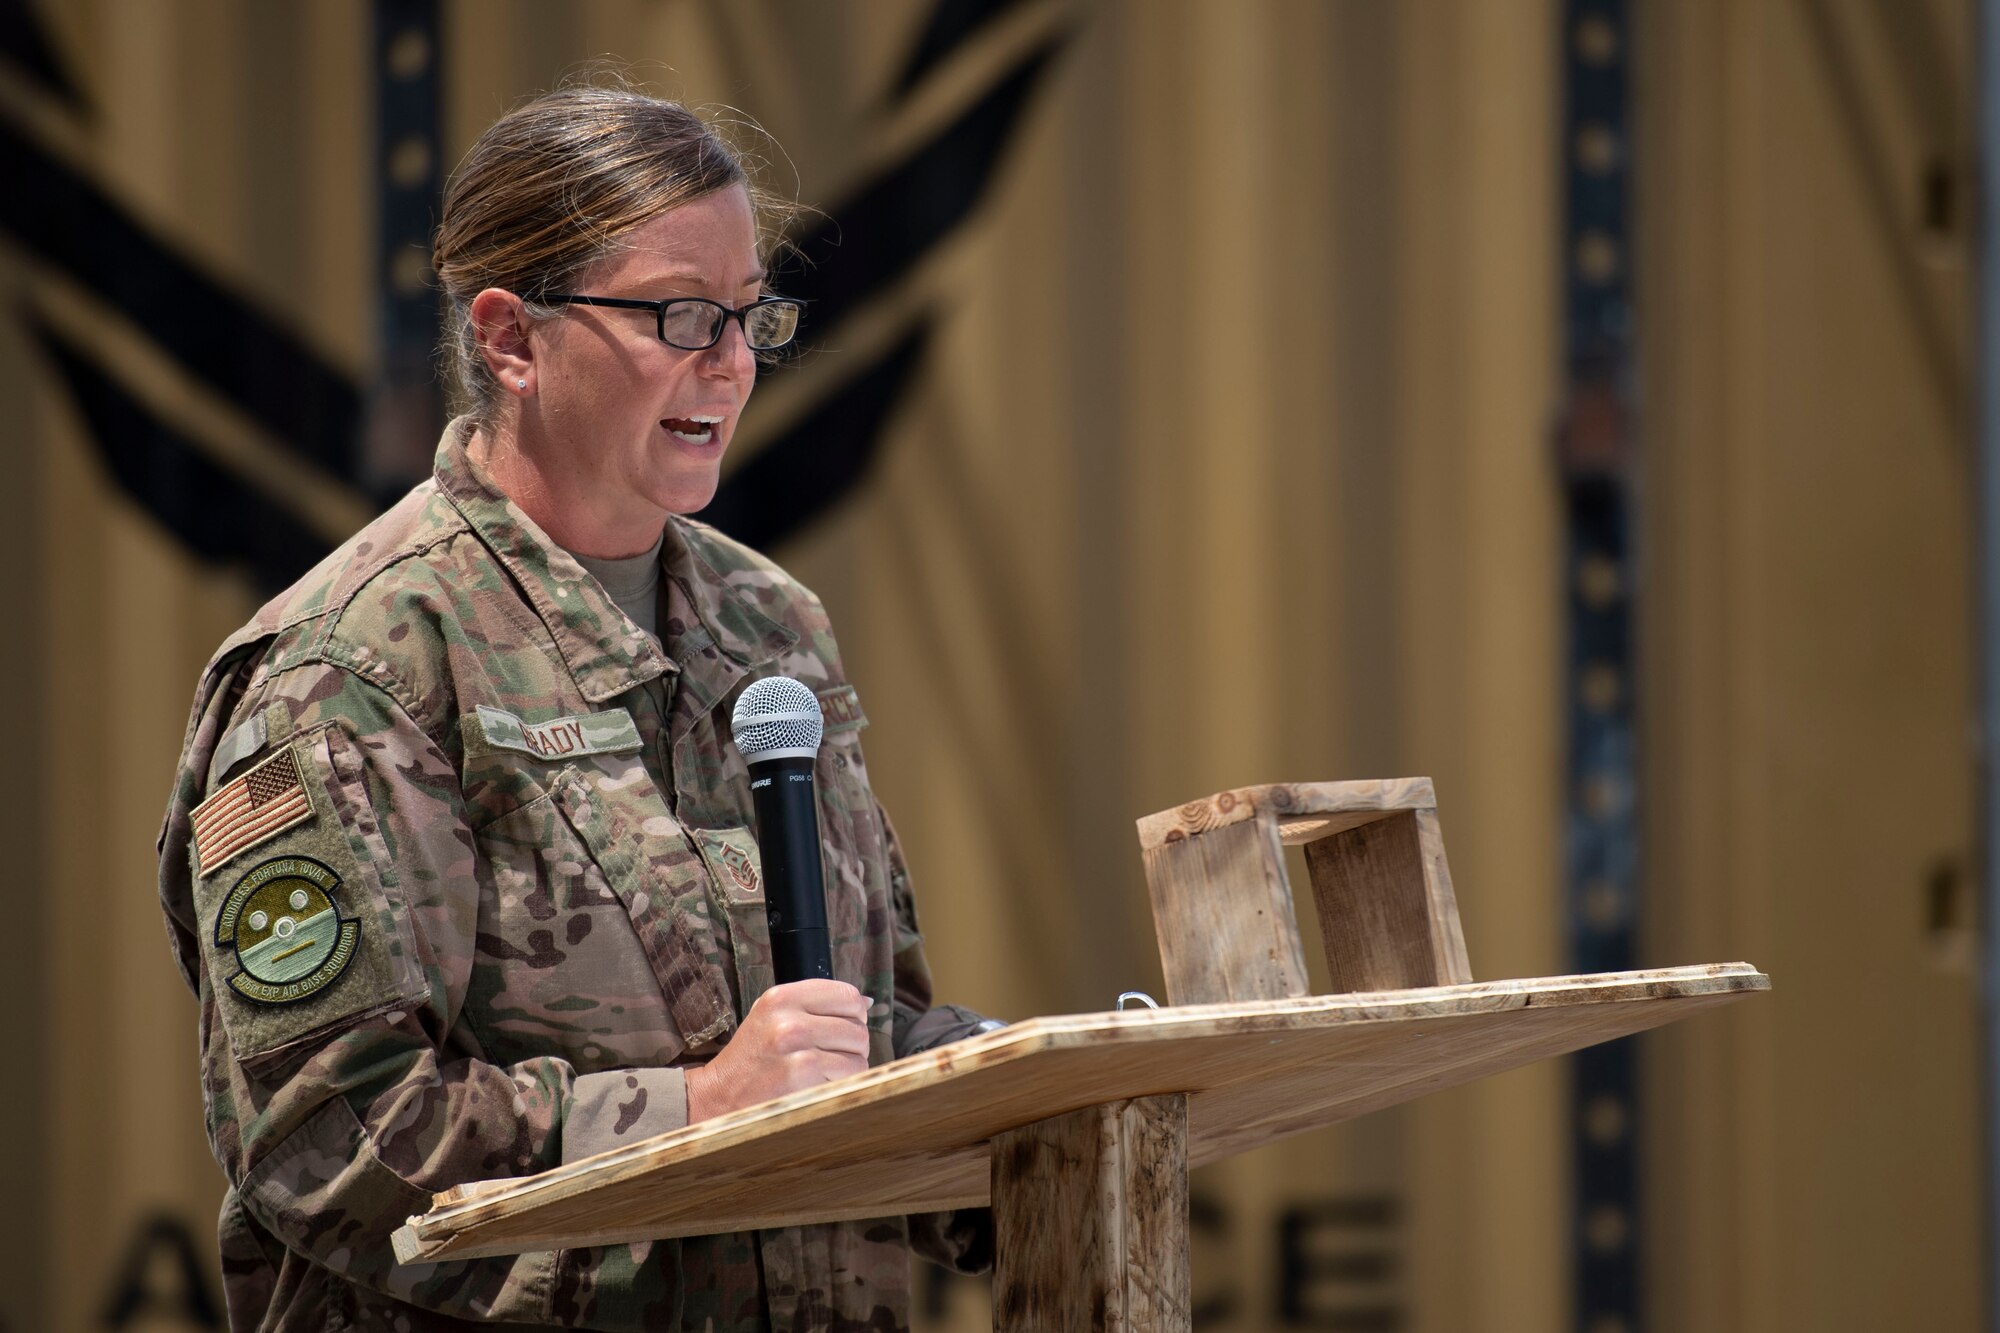 U.S. Air Force Master Sgt. Shannon Brady, 475th Expeditionary Air Base Squadron first sergeant, speaks about the history and symbolism of the American flag at a ceremony at Camp Simba, Kenya, Aug. 26, 2019. The 475th EABS raised the flag for the first time since the base operating support-integrator  mission started in 2017, signifying the change from tactical to enduring operations. (U.S. Air Force photo by Staff Sgt. Lexie West)